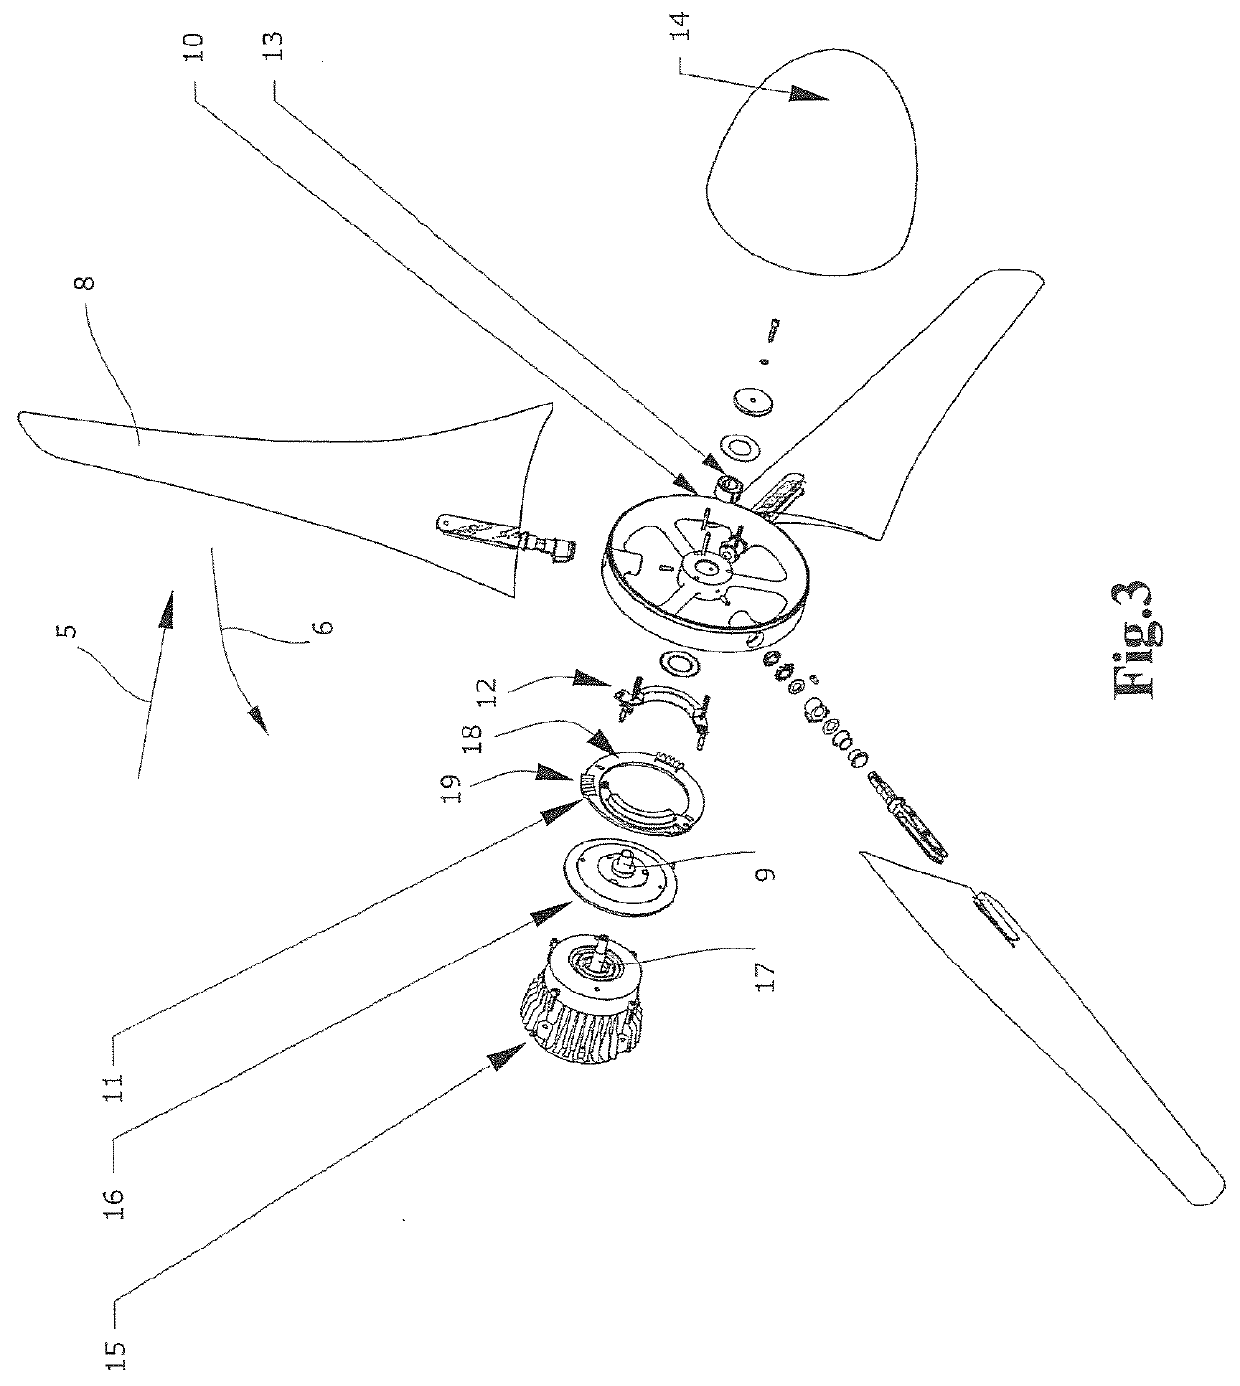 Wind turbine with a centrifugal force driven adjustable pitch angle and cables retaining blades in a hub